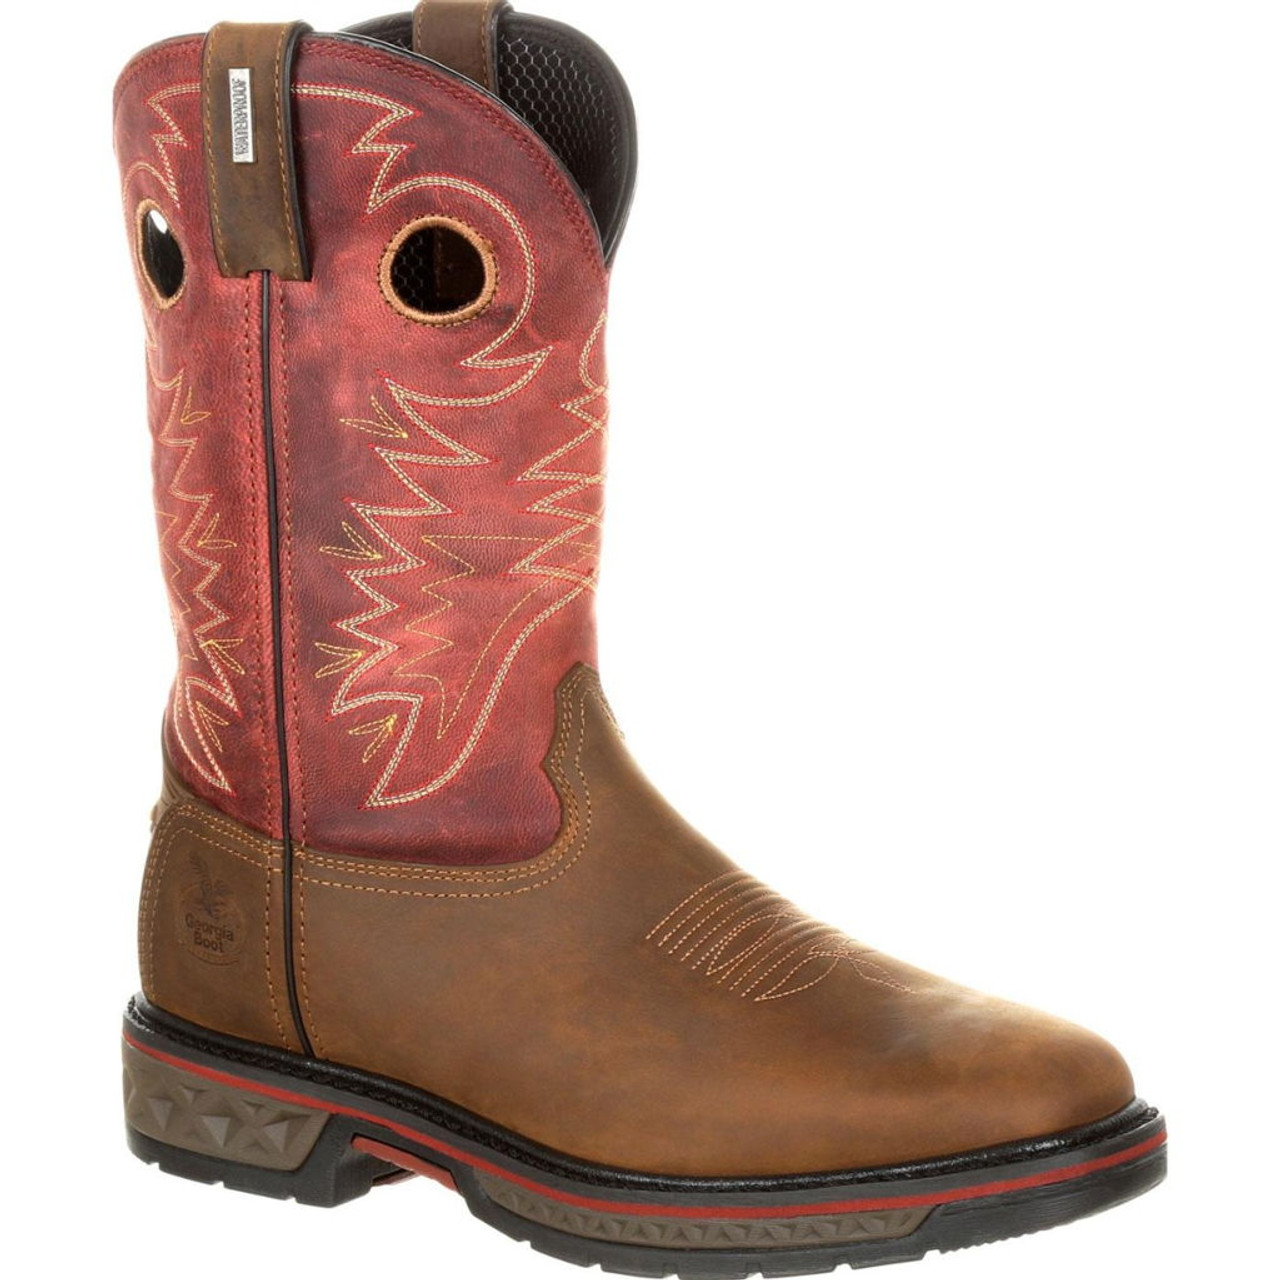 Georgia Boot Men's Carbo-tec Waterproof Pull-on Boots